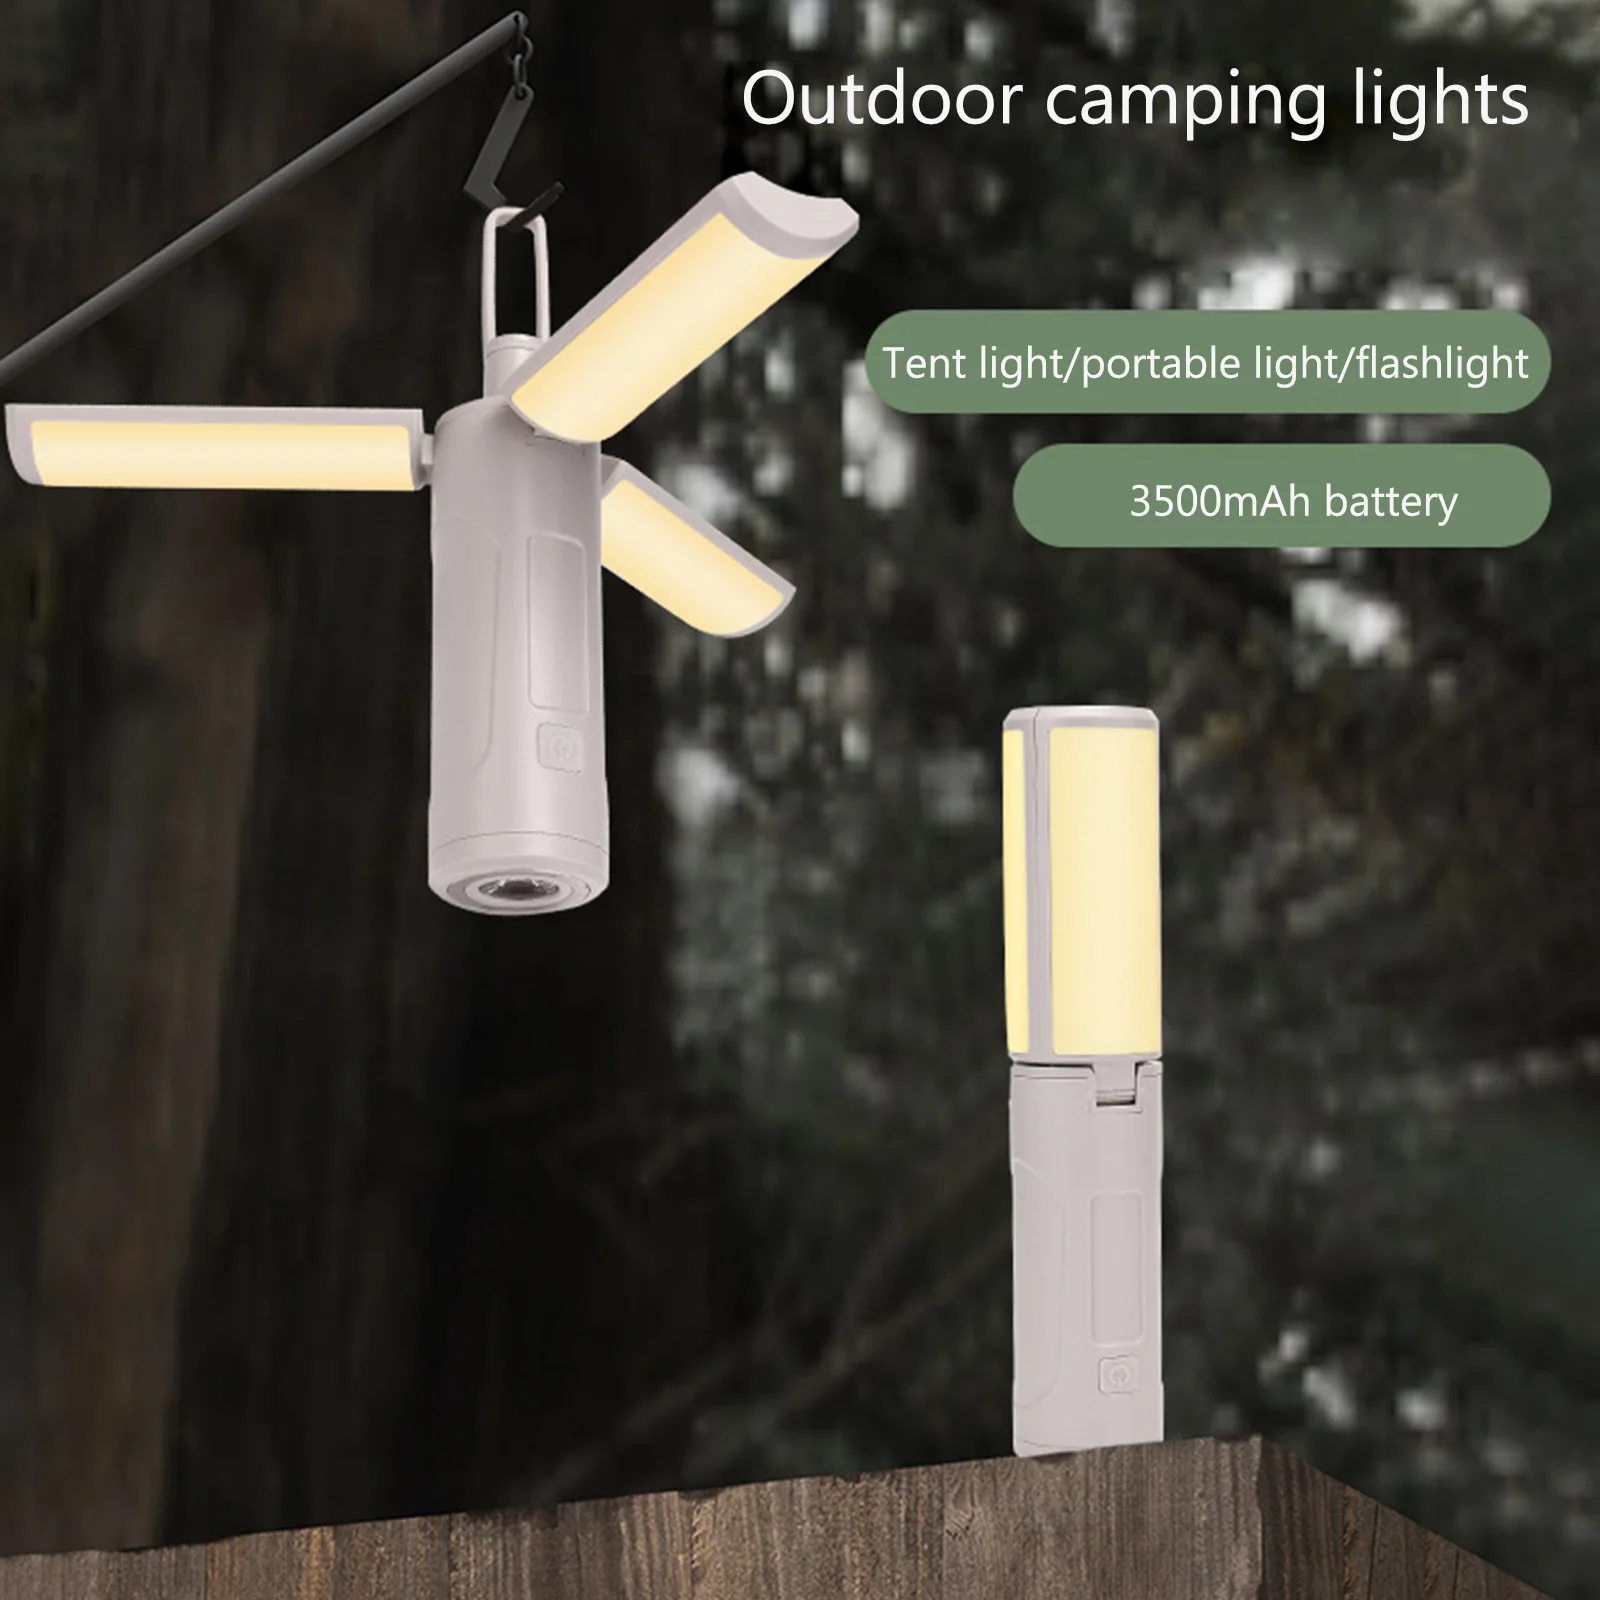 

Folding Tent Lamp Portable Lantern 3500mAh Camp Tent Light Dimmable 30-720LM Power Bank Waterproof for Hiking Picnic Lighting